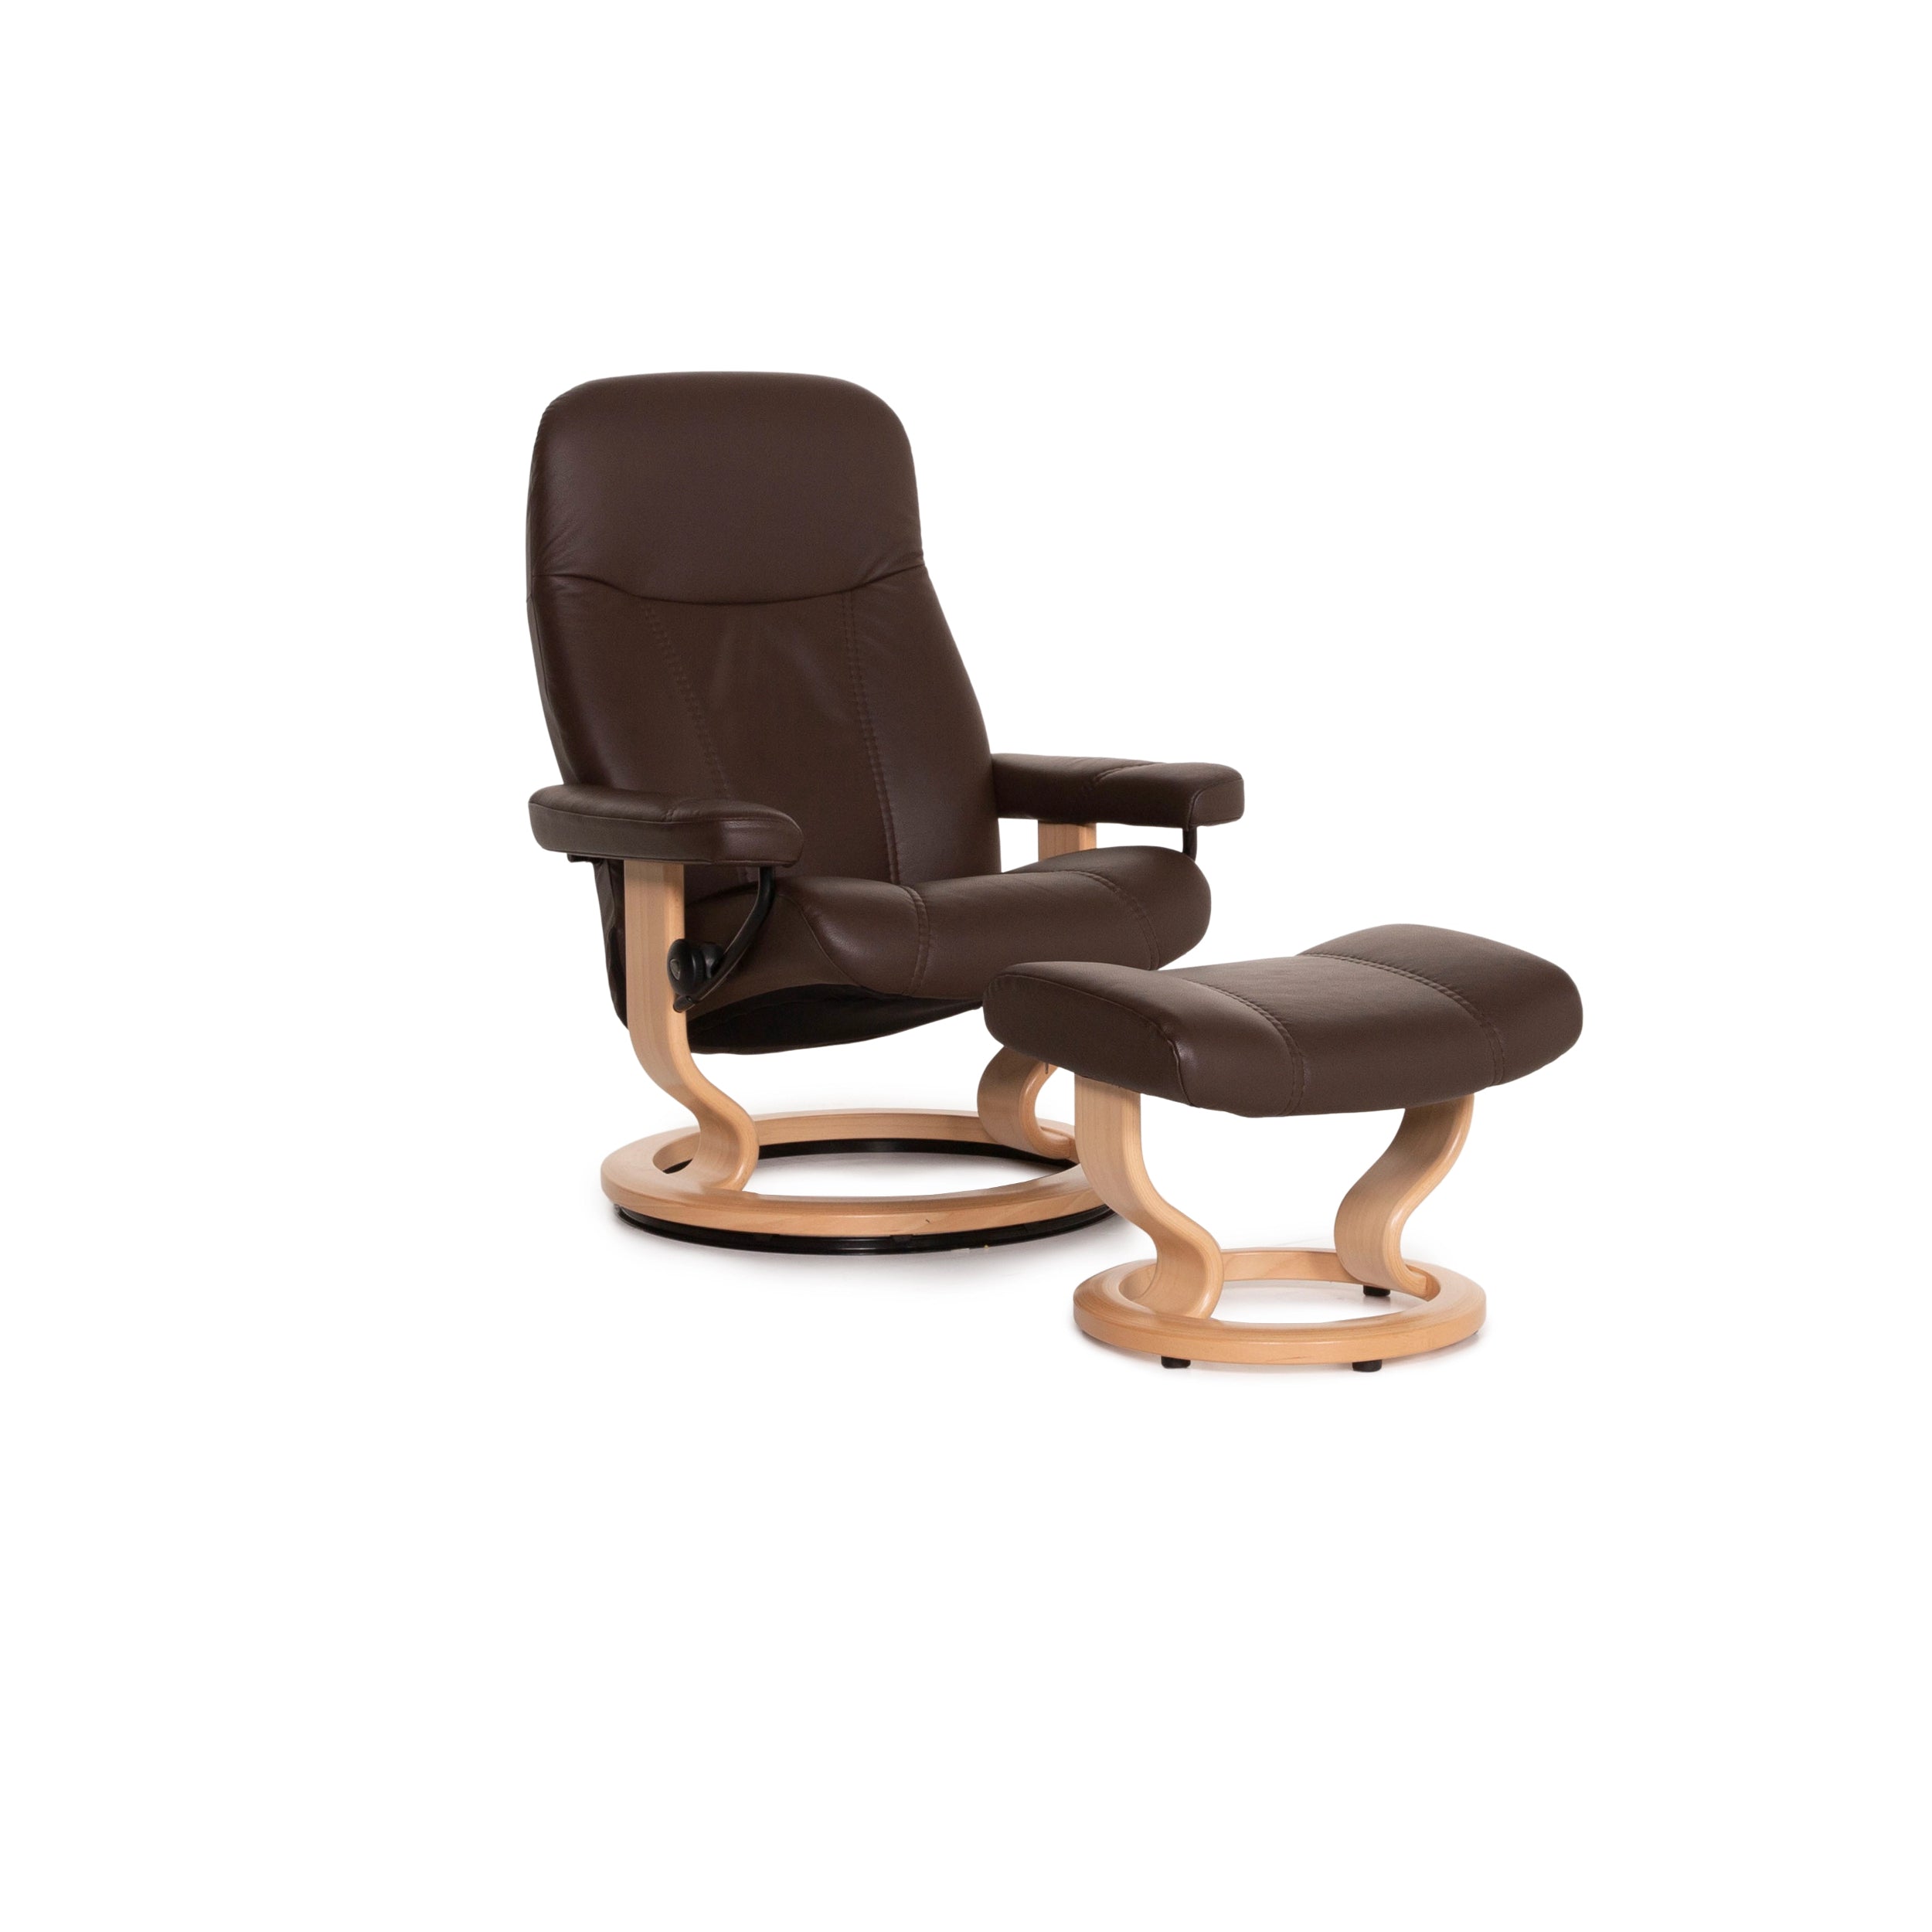 Stressless Consul leather armchair brown size M incl. stool dark brown relax armchair function relax function